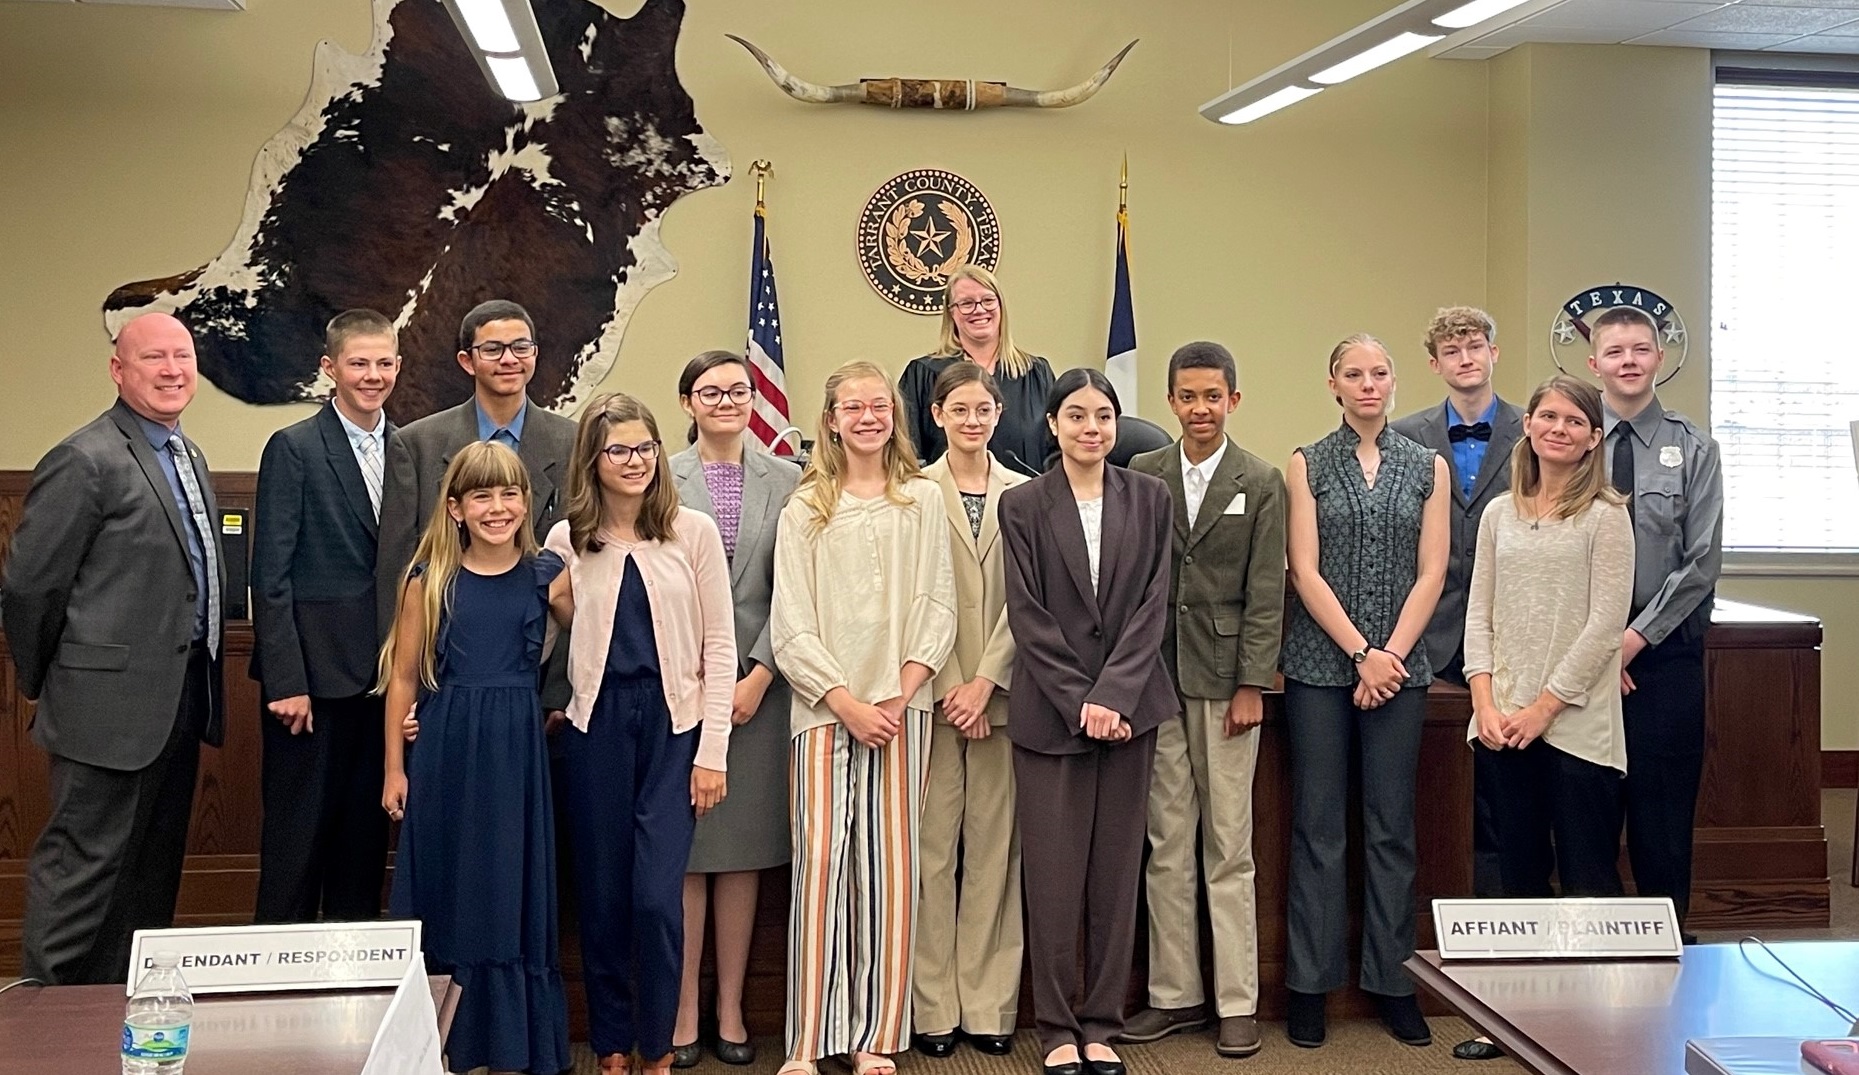 PHOTO OF A JUDGE WITH STUDENTS THAT PARTICIPATED IN A MOCK TRIAL